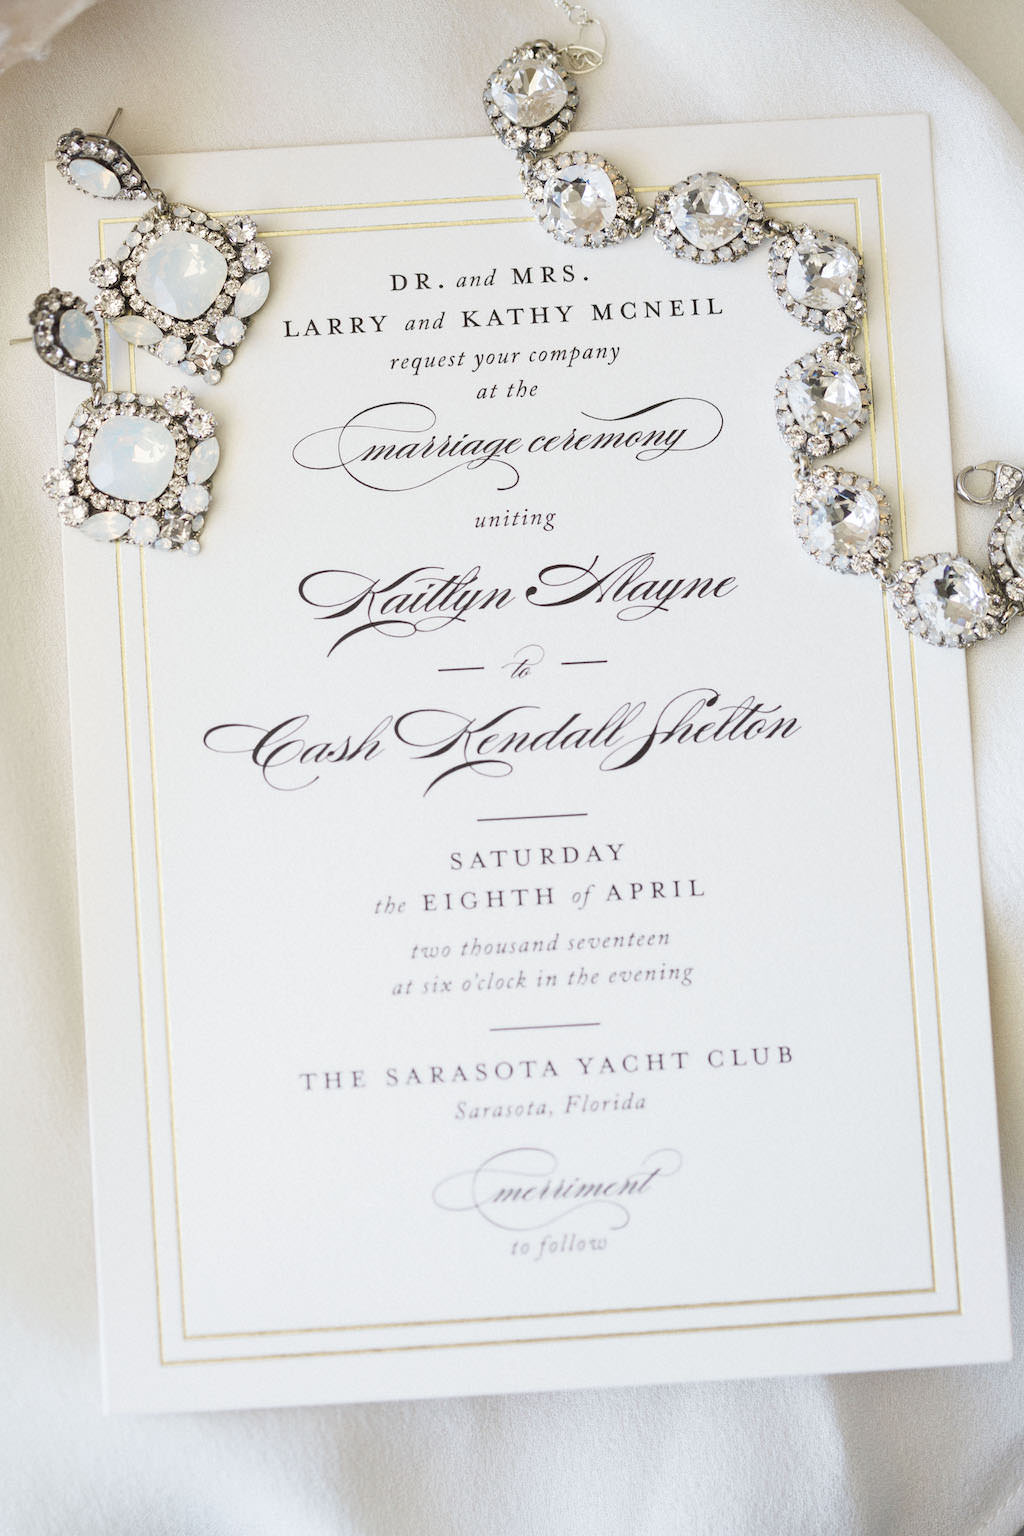 Elegant Black, White with Gold Foil Wedding Invitation with Vintage Inspired Bridal Jewelry Accessories